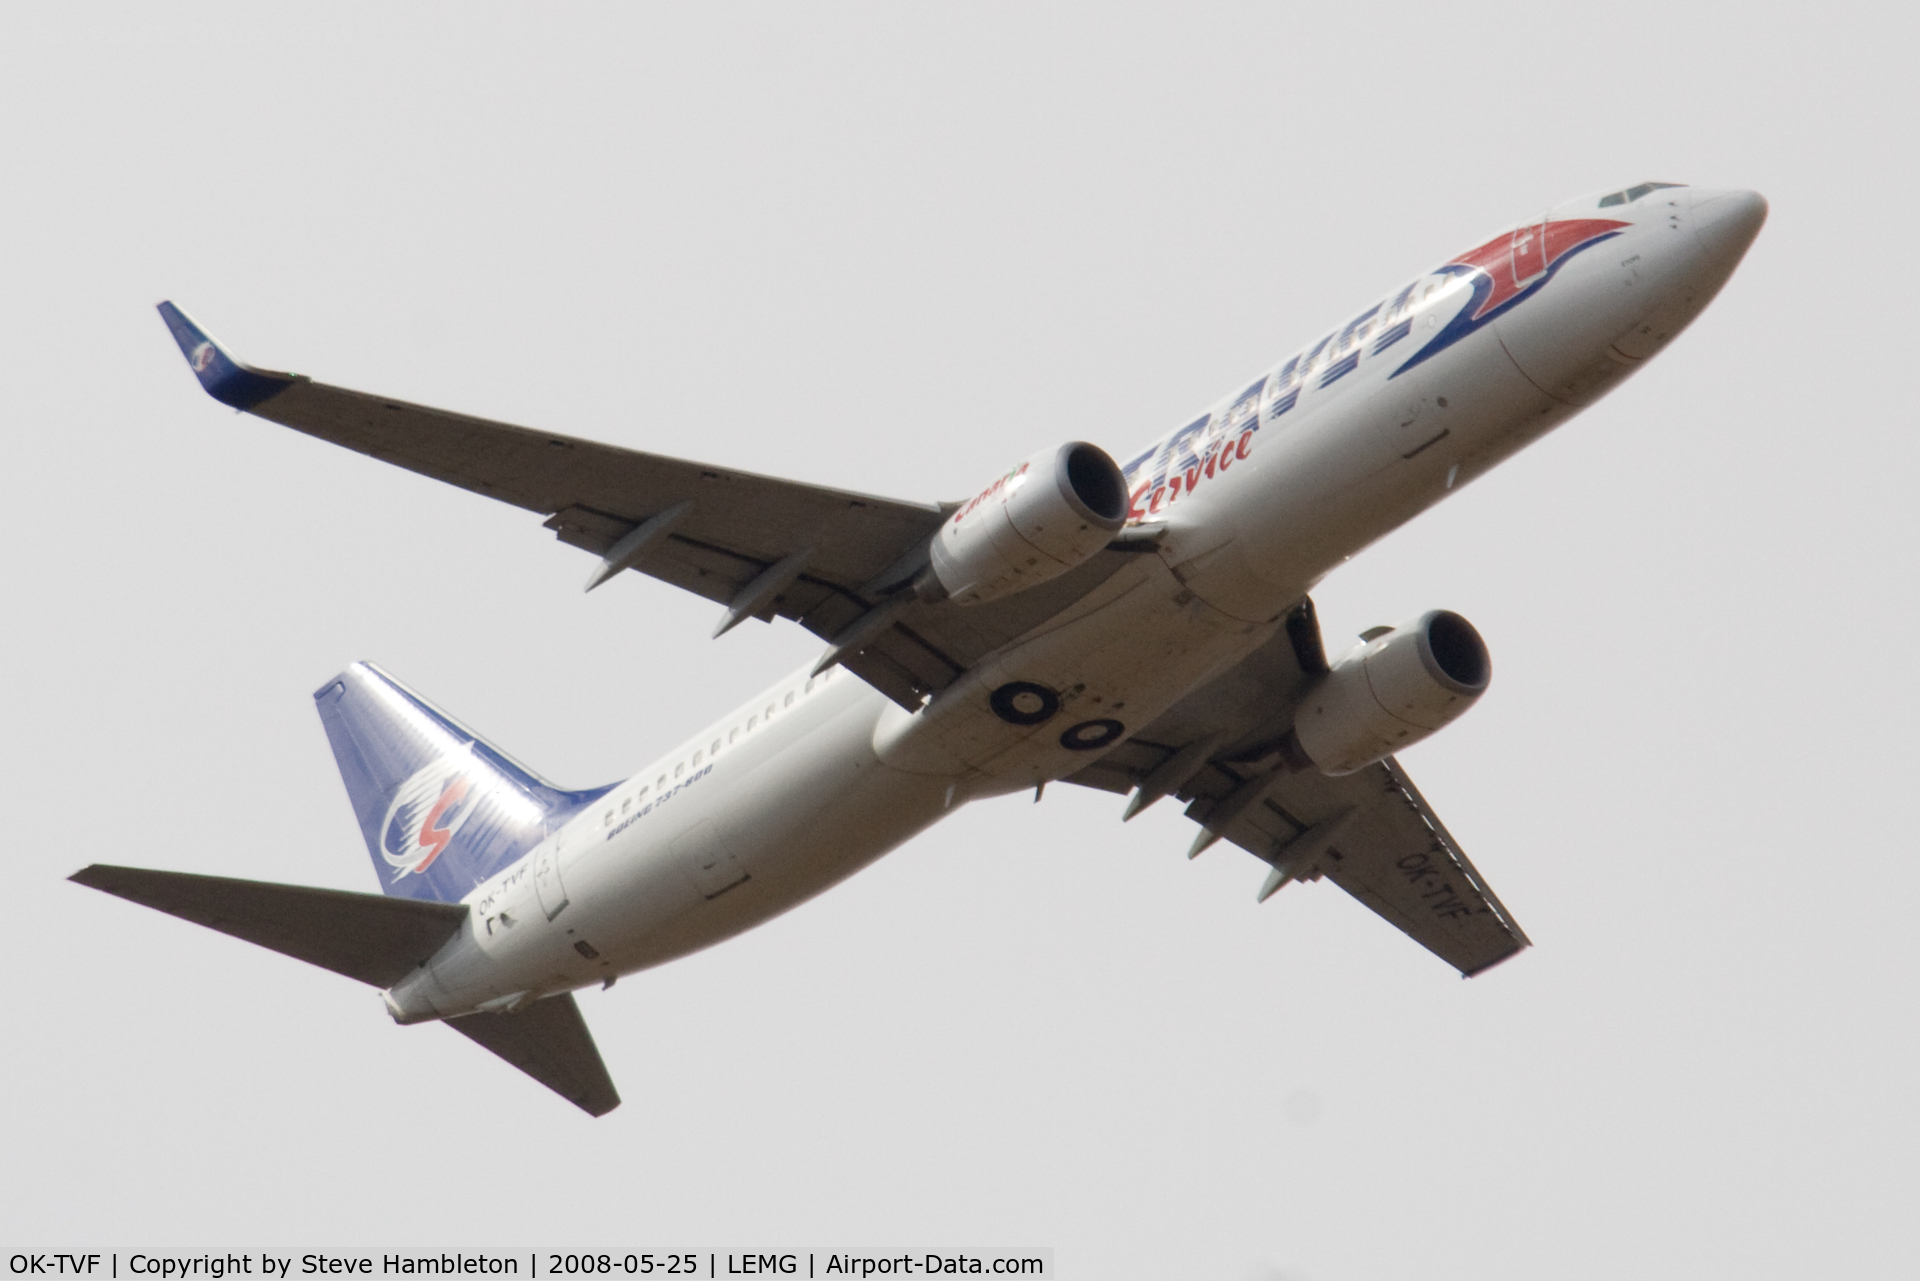 OK-TVF, 2005 Boeing 737-8FH C/N 29669, Approaching Malaga with 11 miles to run